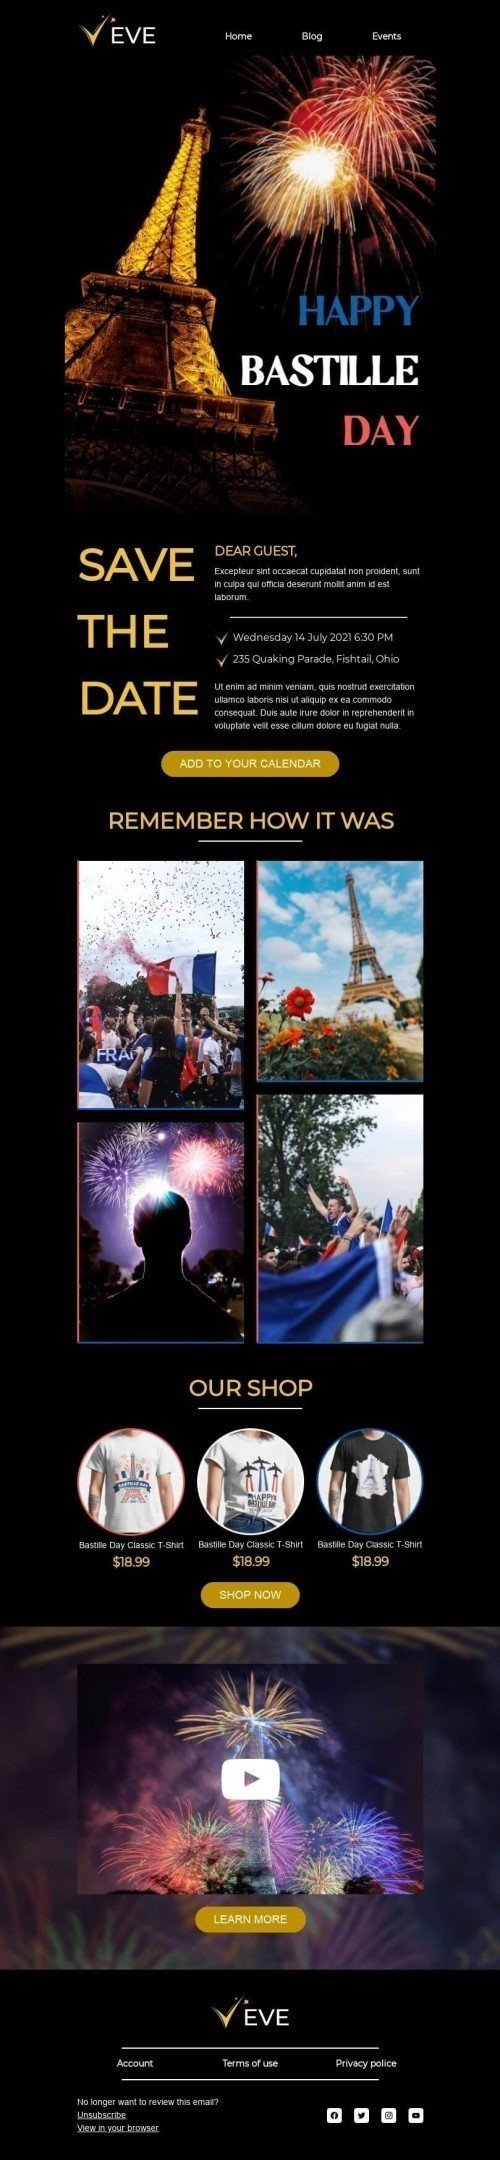 Bastille Day Email Template «Dear Guest» for Hobbies industry mobile view